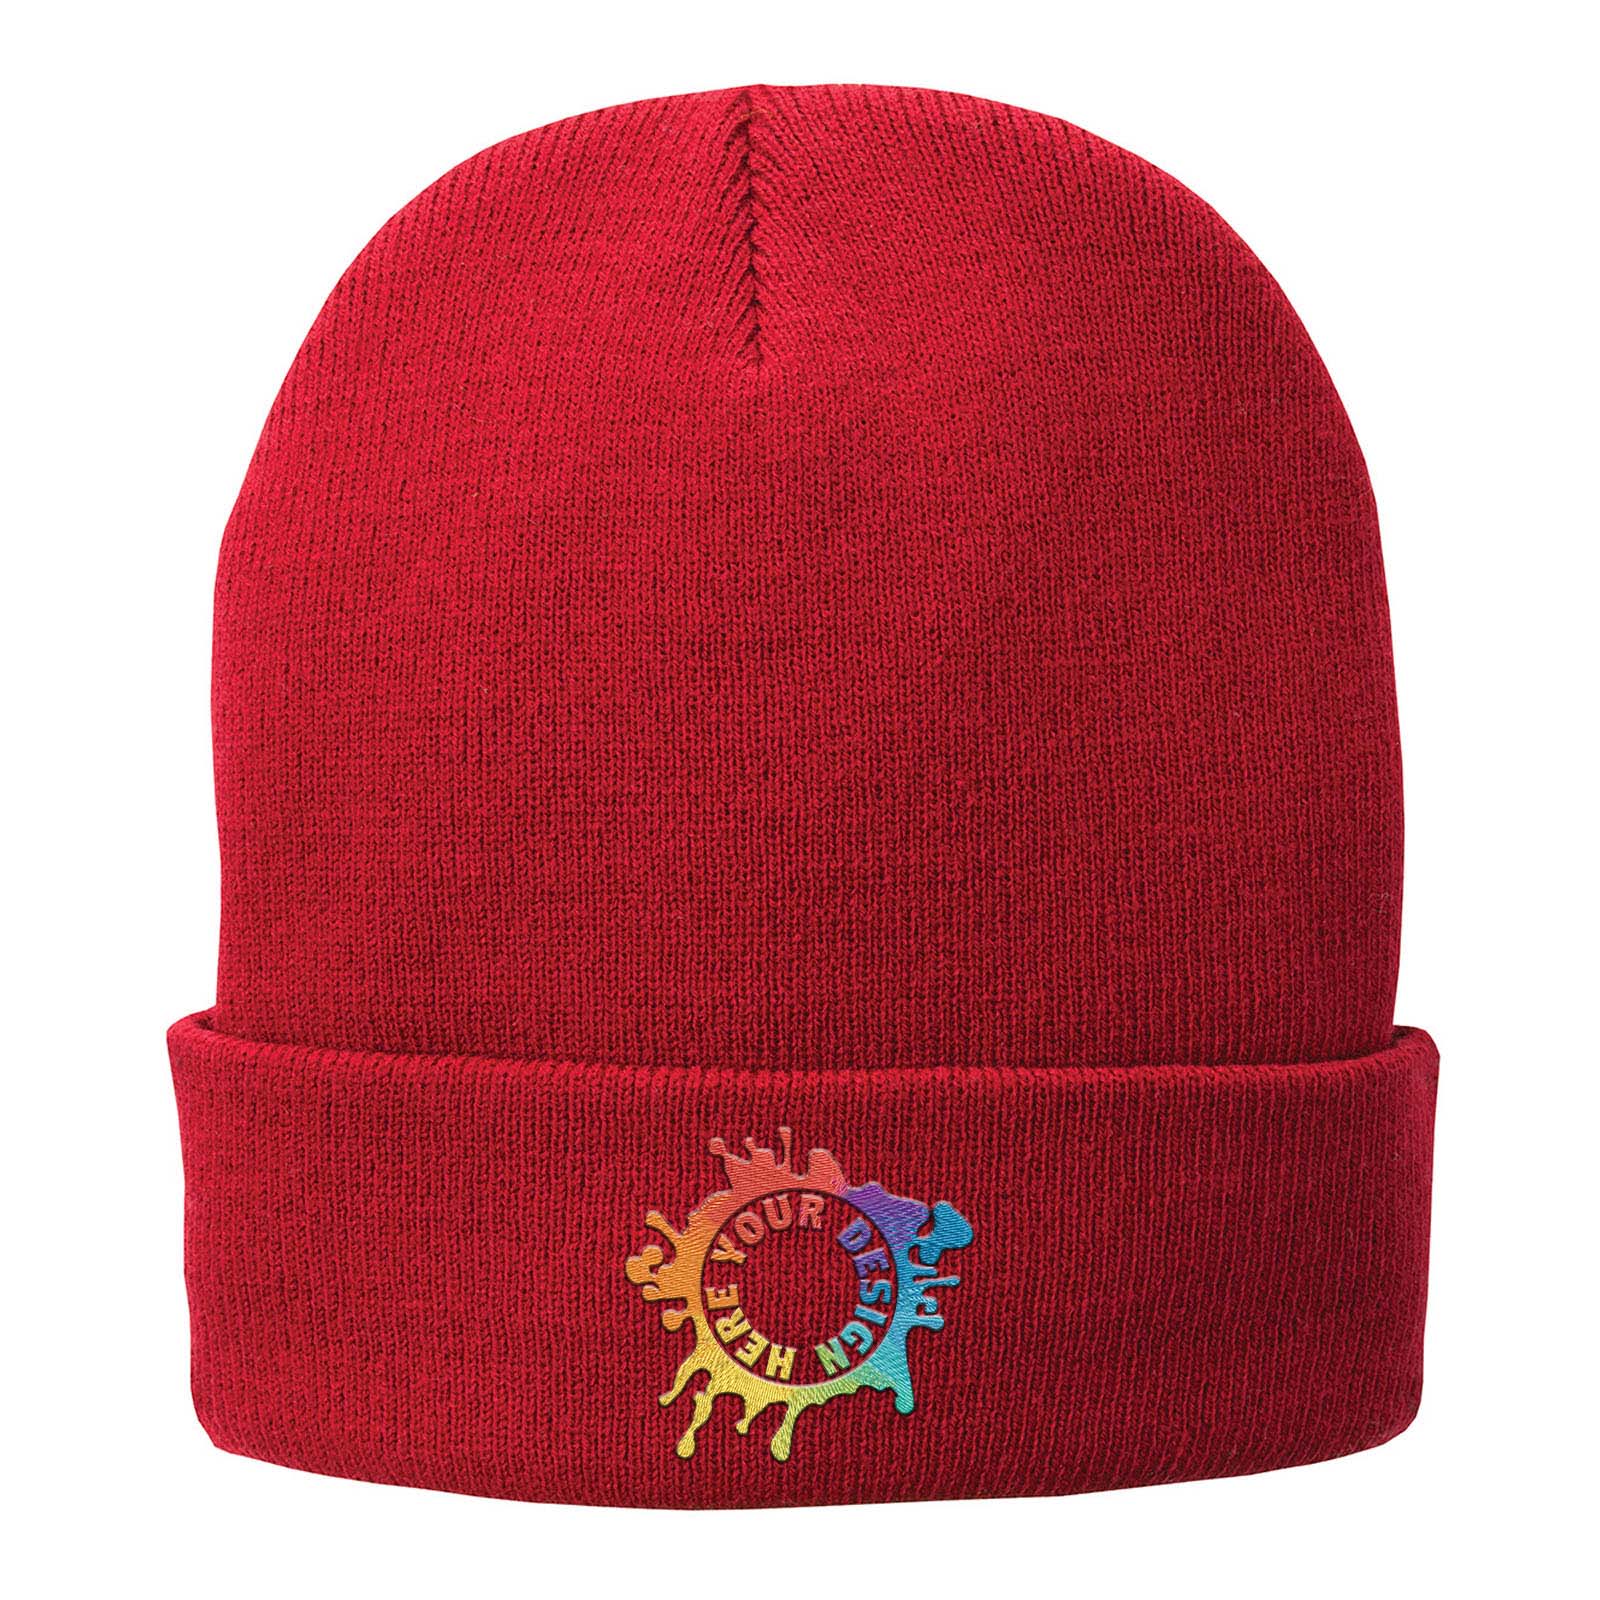 Embroidered Port & Company® Fleece-Lined Knit Cap - Mato & Hash